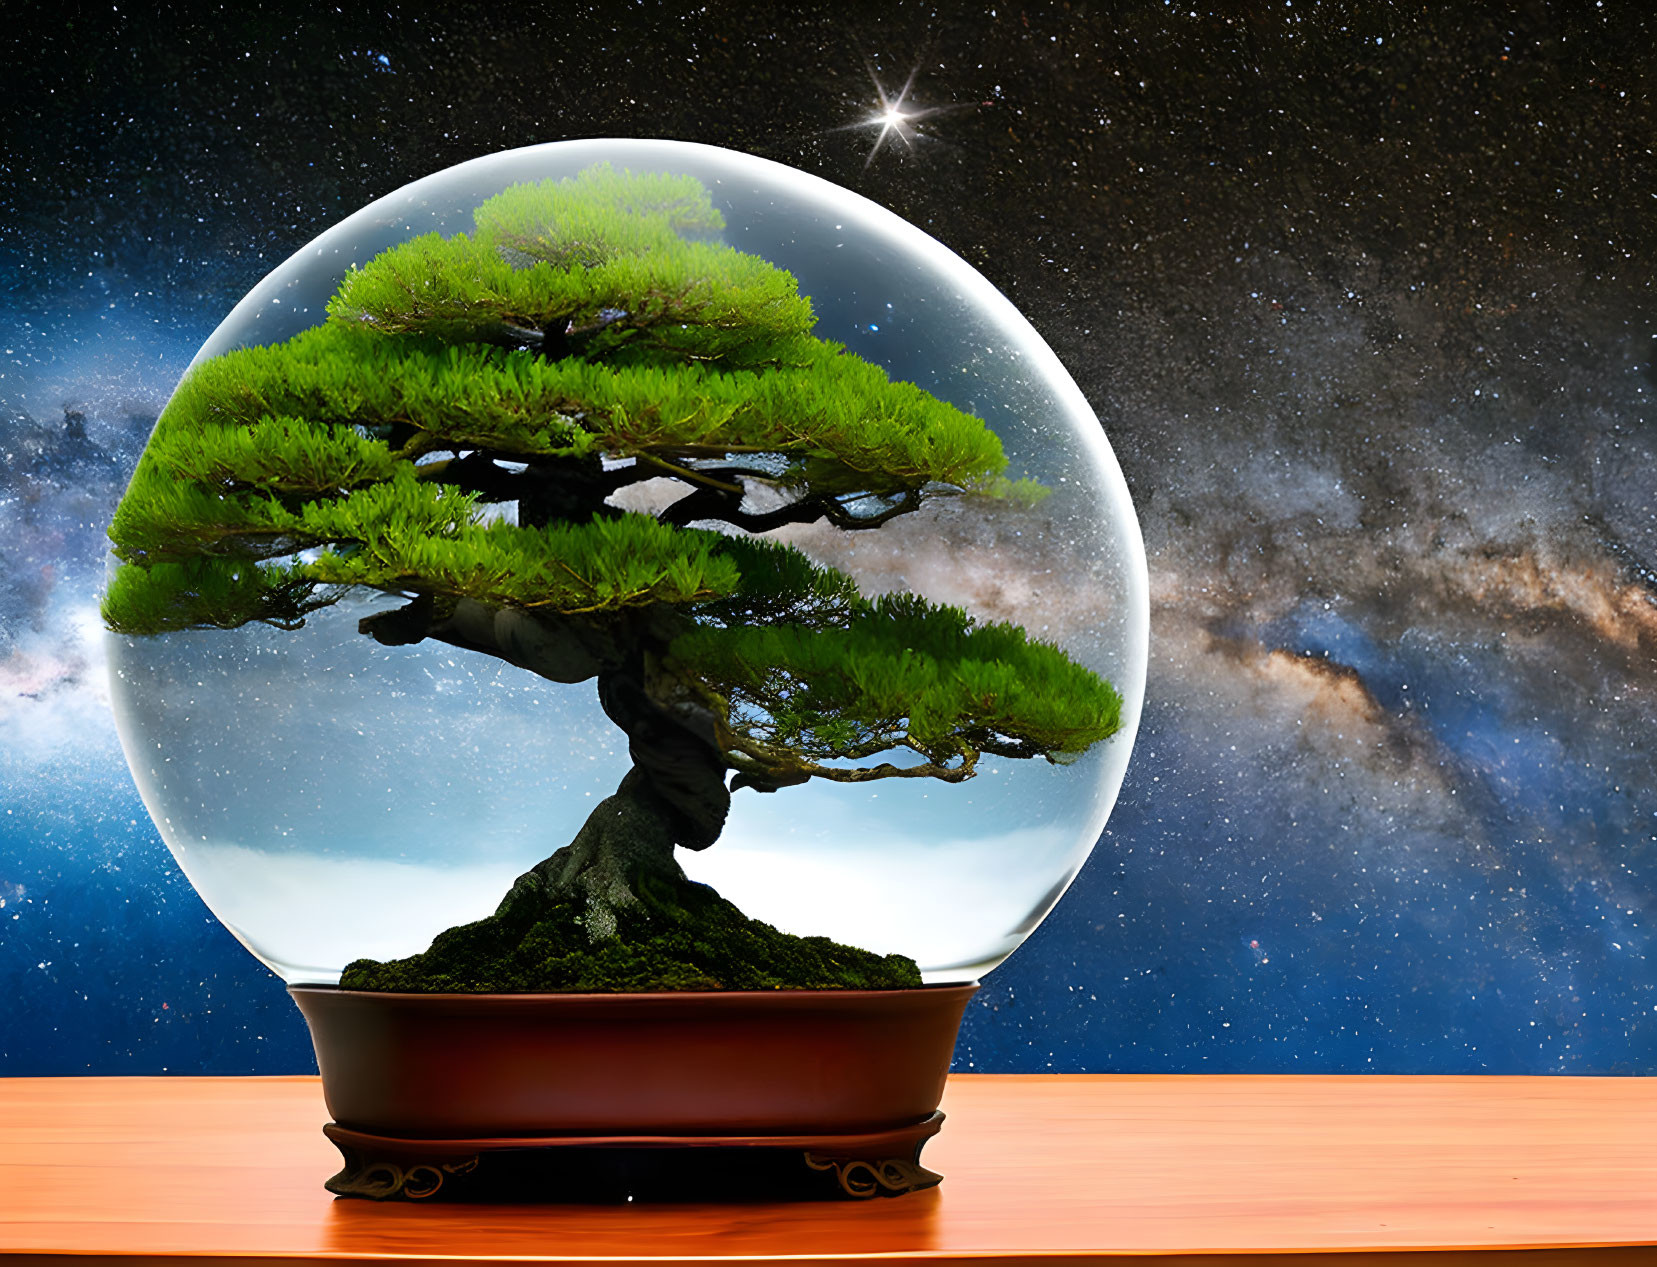 Bonsai tree in transparent sphere with starry sky reflection on wooden surface